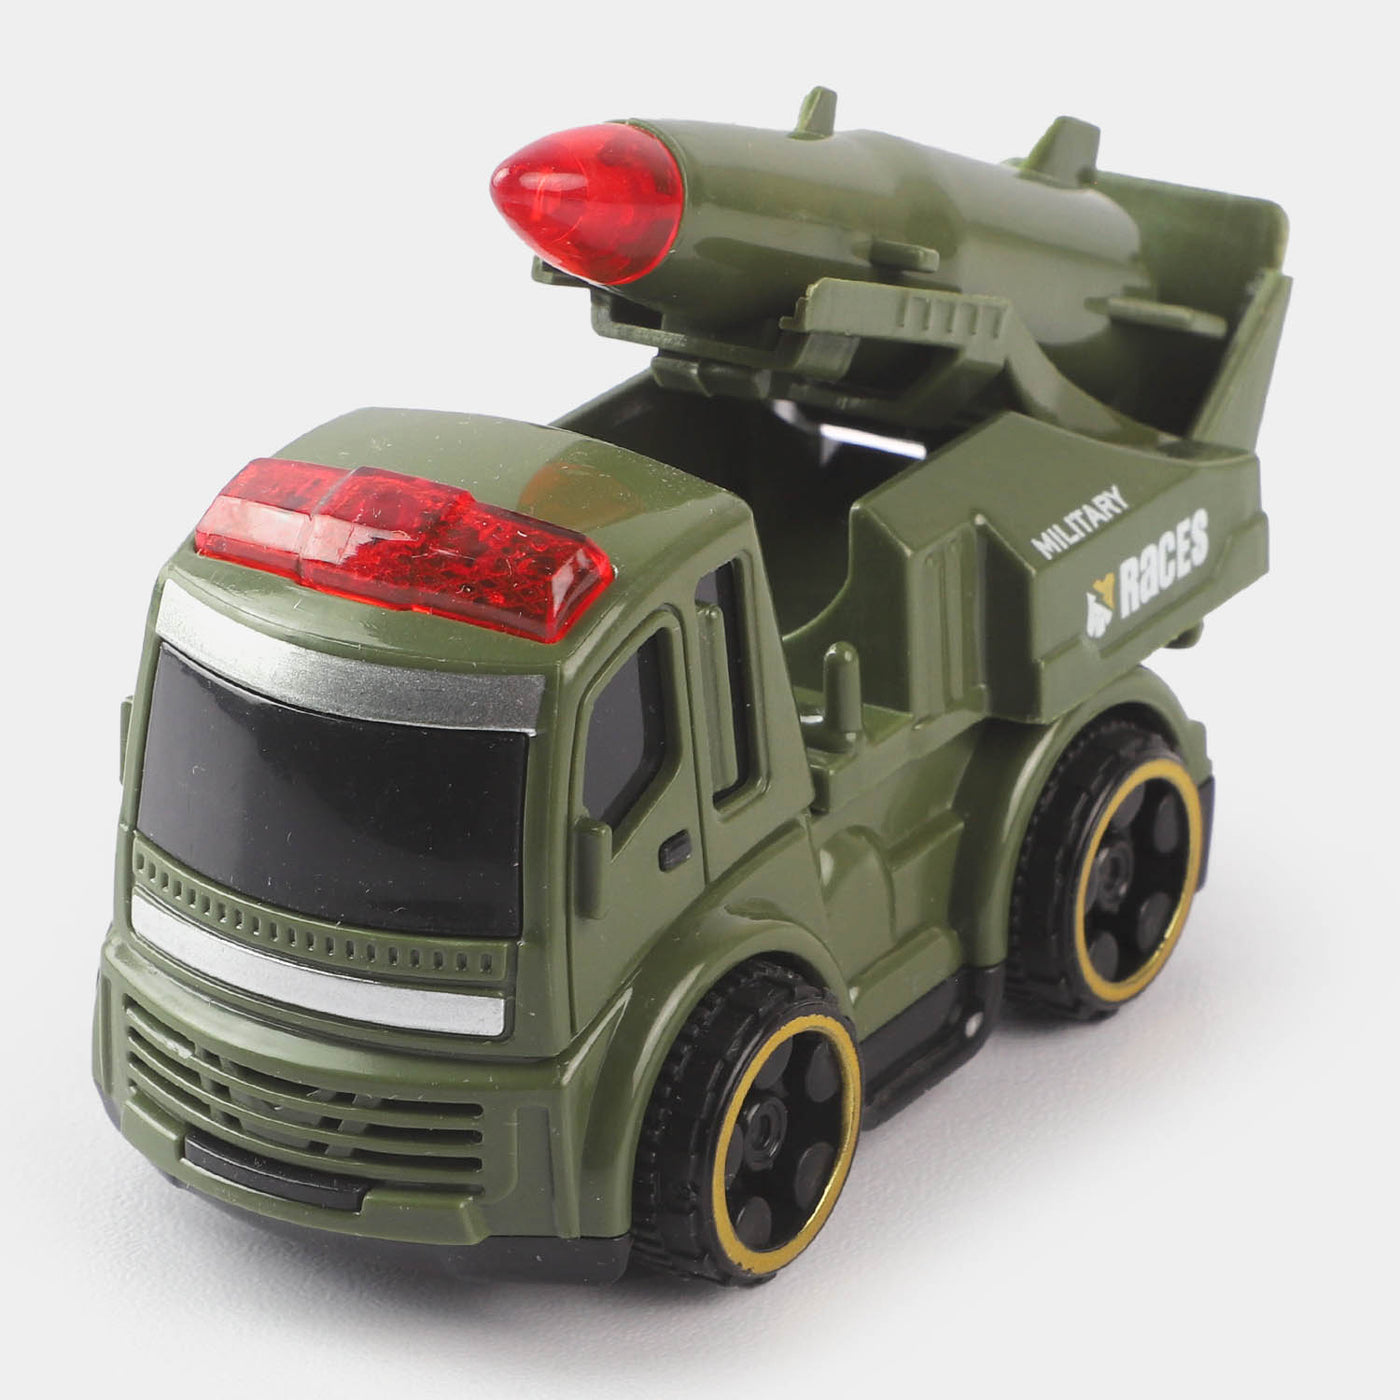 Friction Mini Armed Model Vehicle Toy For Kids